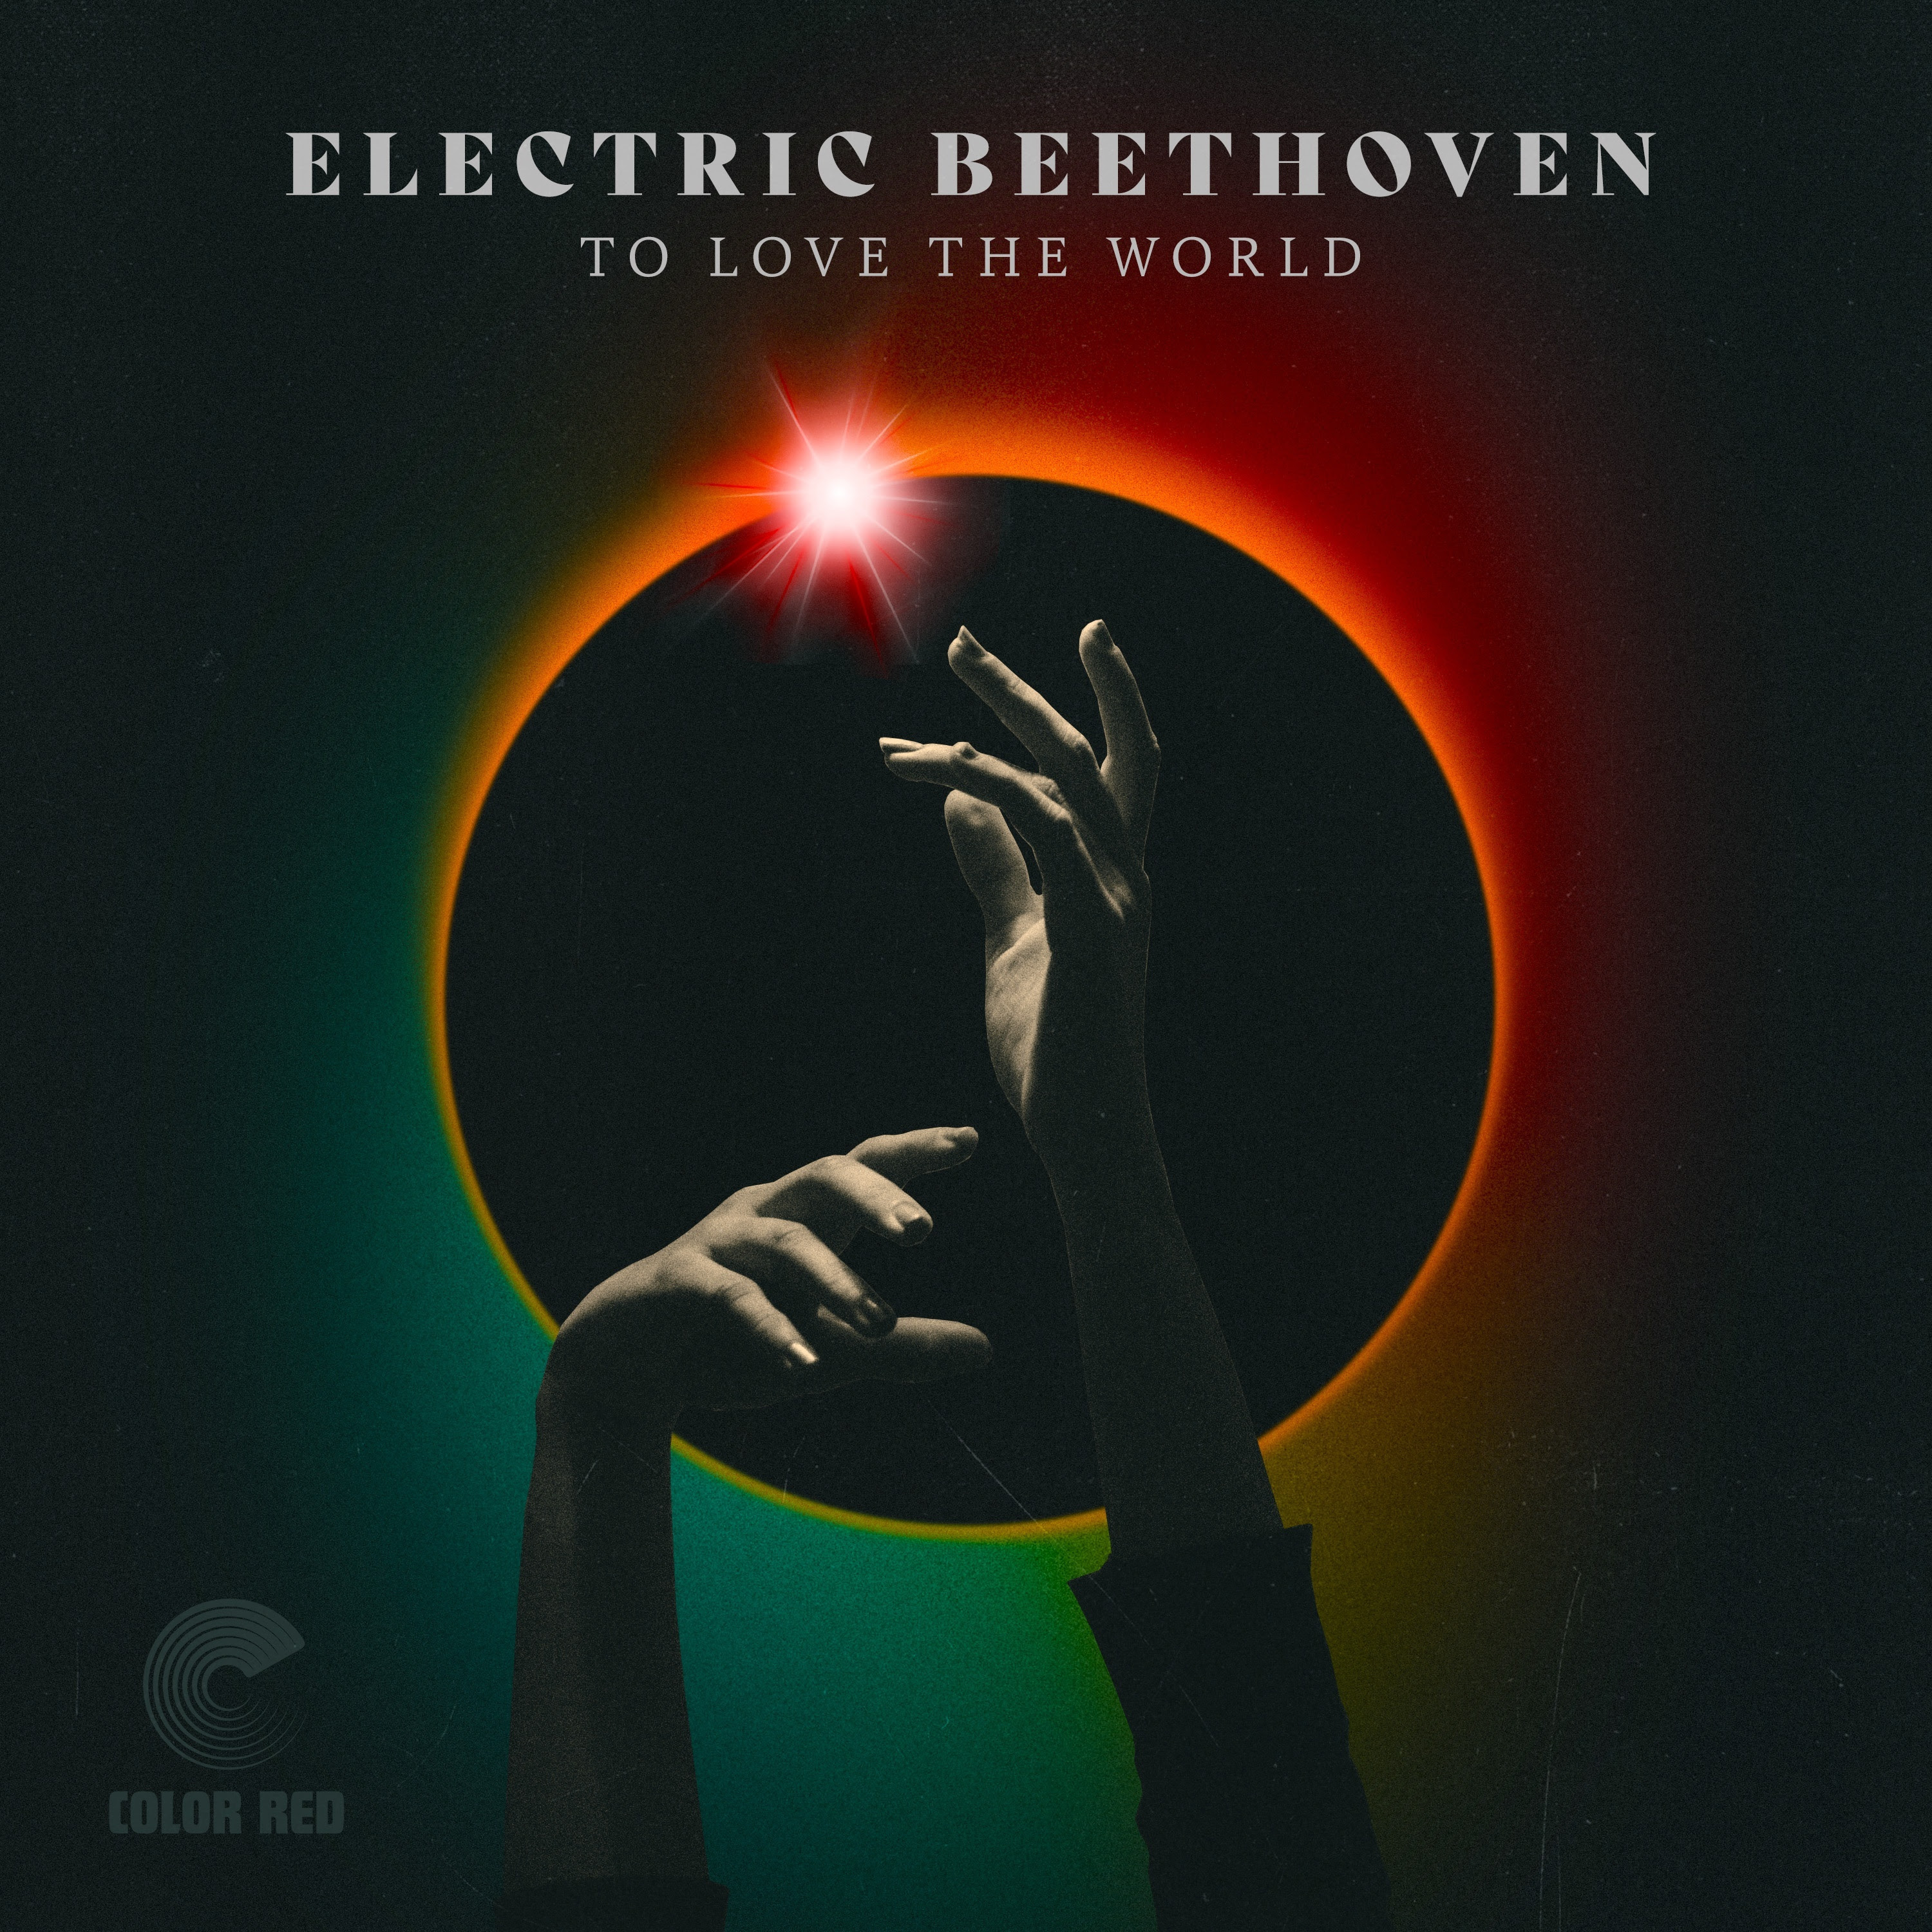 Electric Beethoven Releases "To Love the World" to Complete the First Digital 45 of a Monthly Release Series